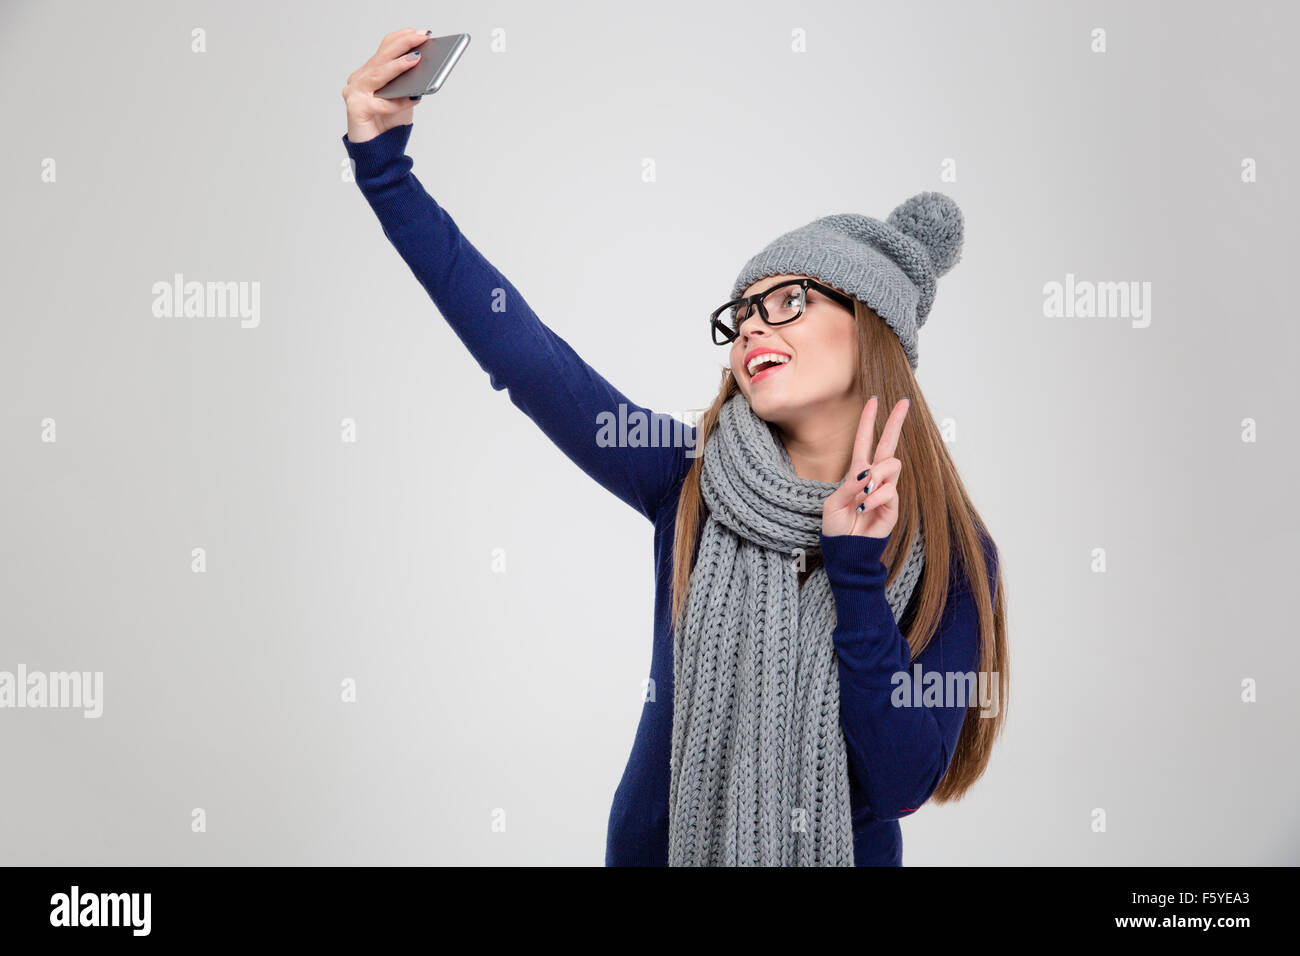 Portrait of a happy woman in winter cloth making selfie photo on smartphone and showing peace sign isolated on a white backgroun Stock Photo